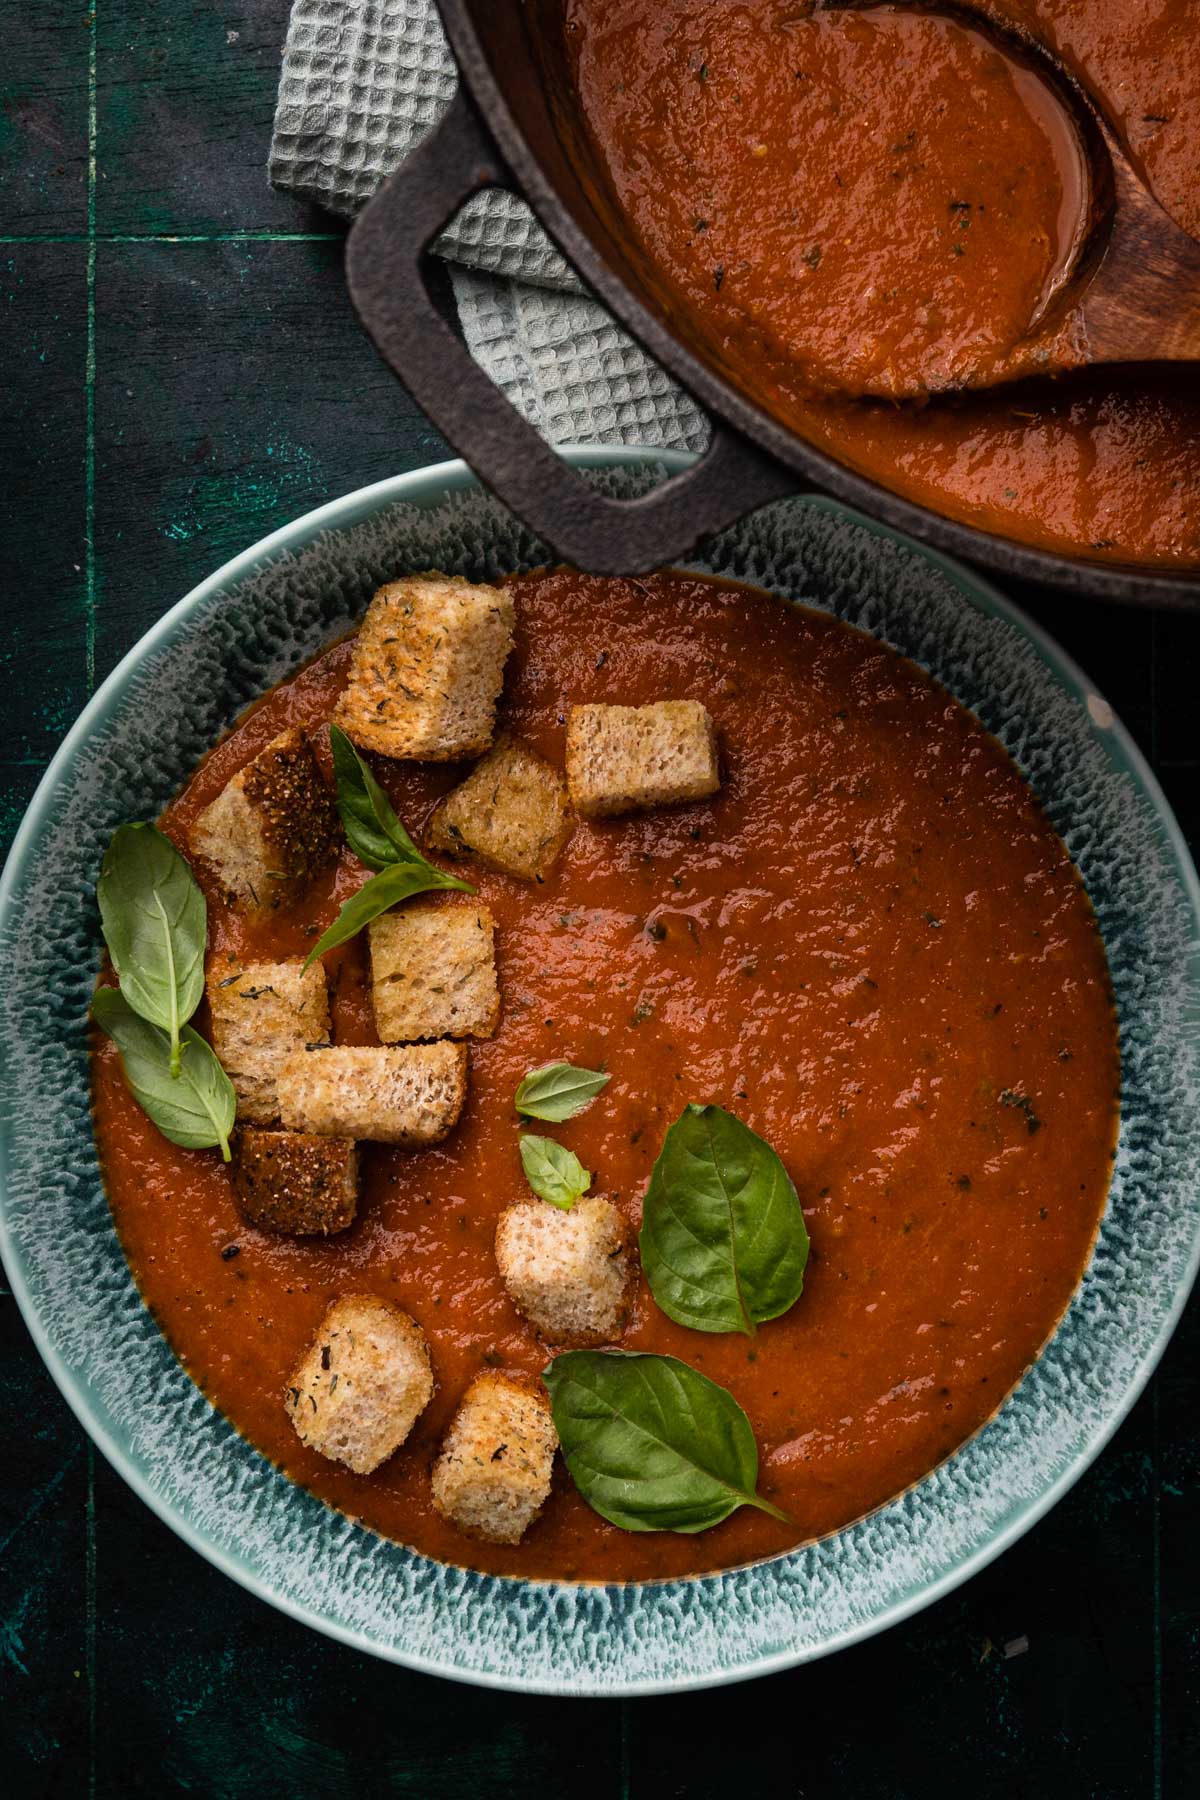 A bowl of tomato soup garnished with basil and croutons, next to a cast iron pot of soup and a cloth, on a dark wooden table.